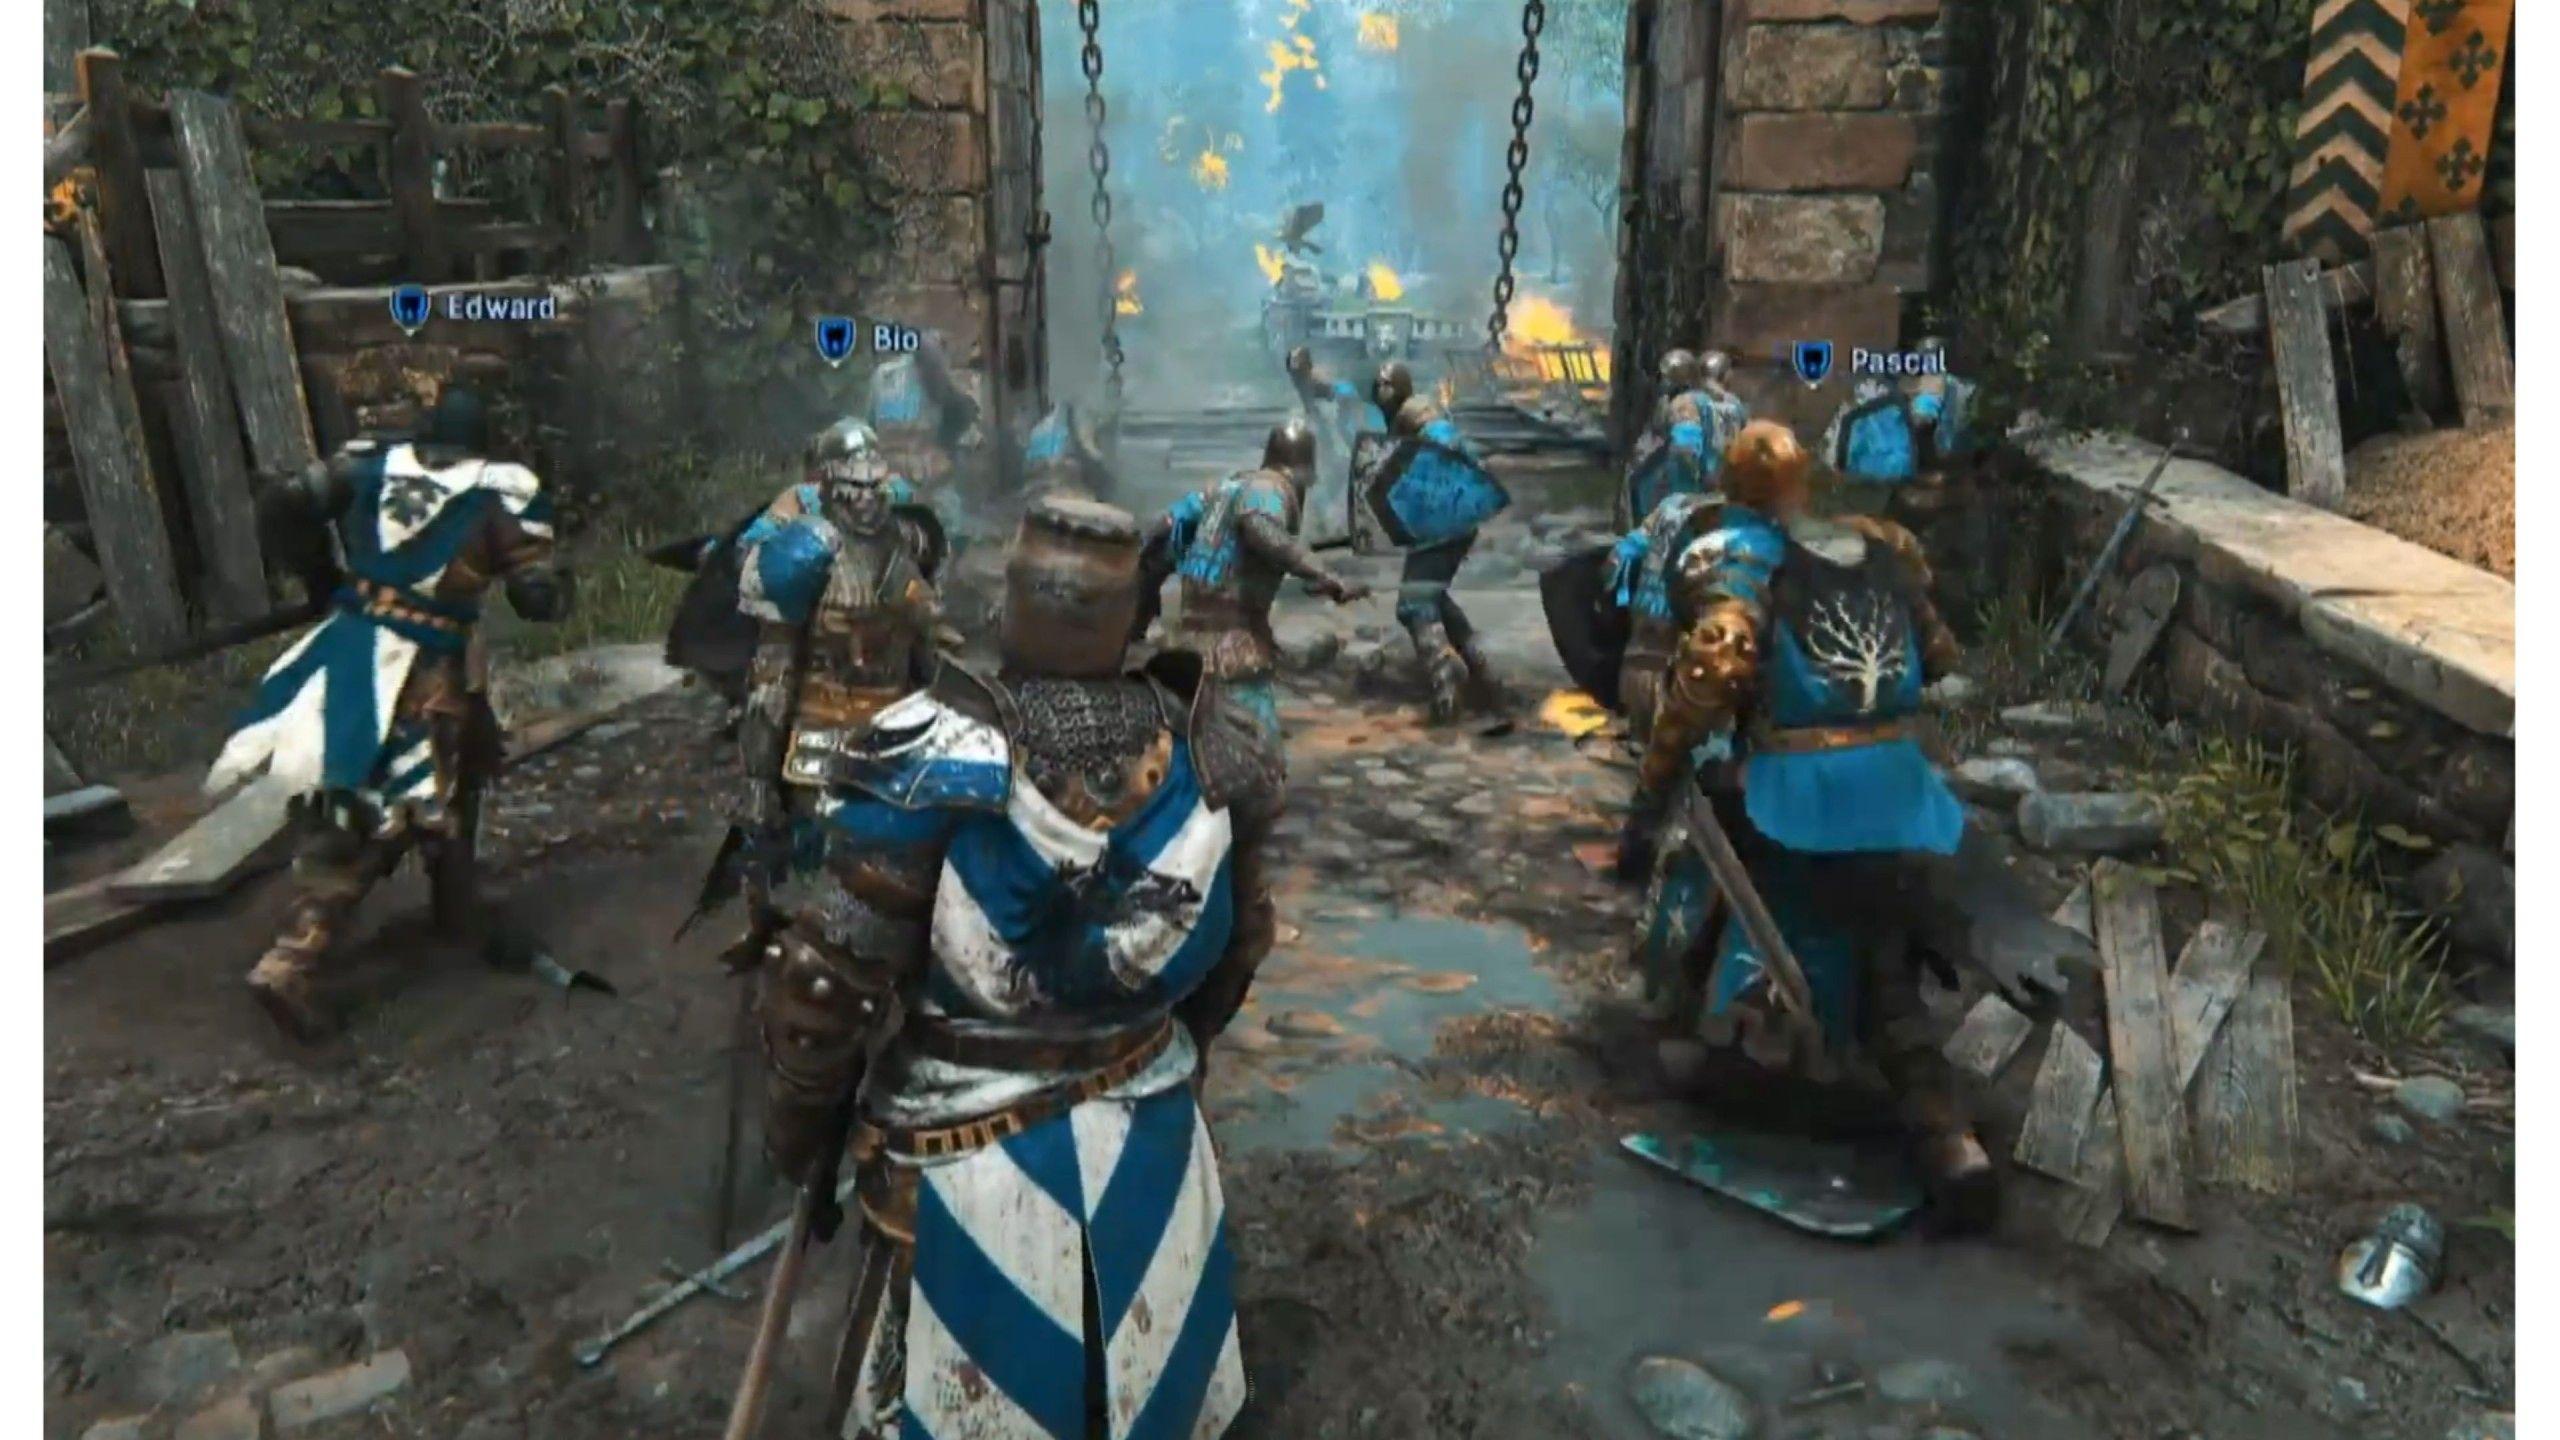 4k for honor